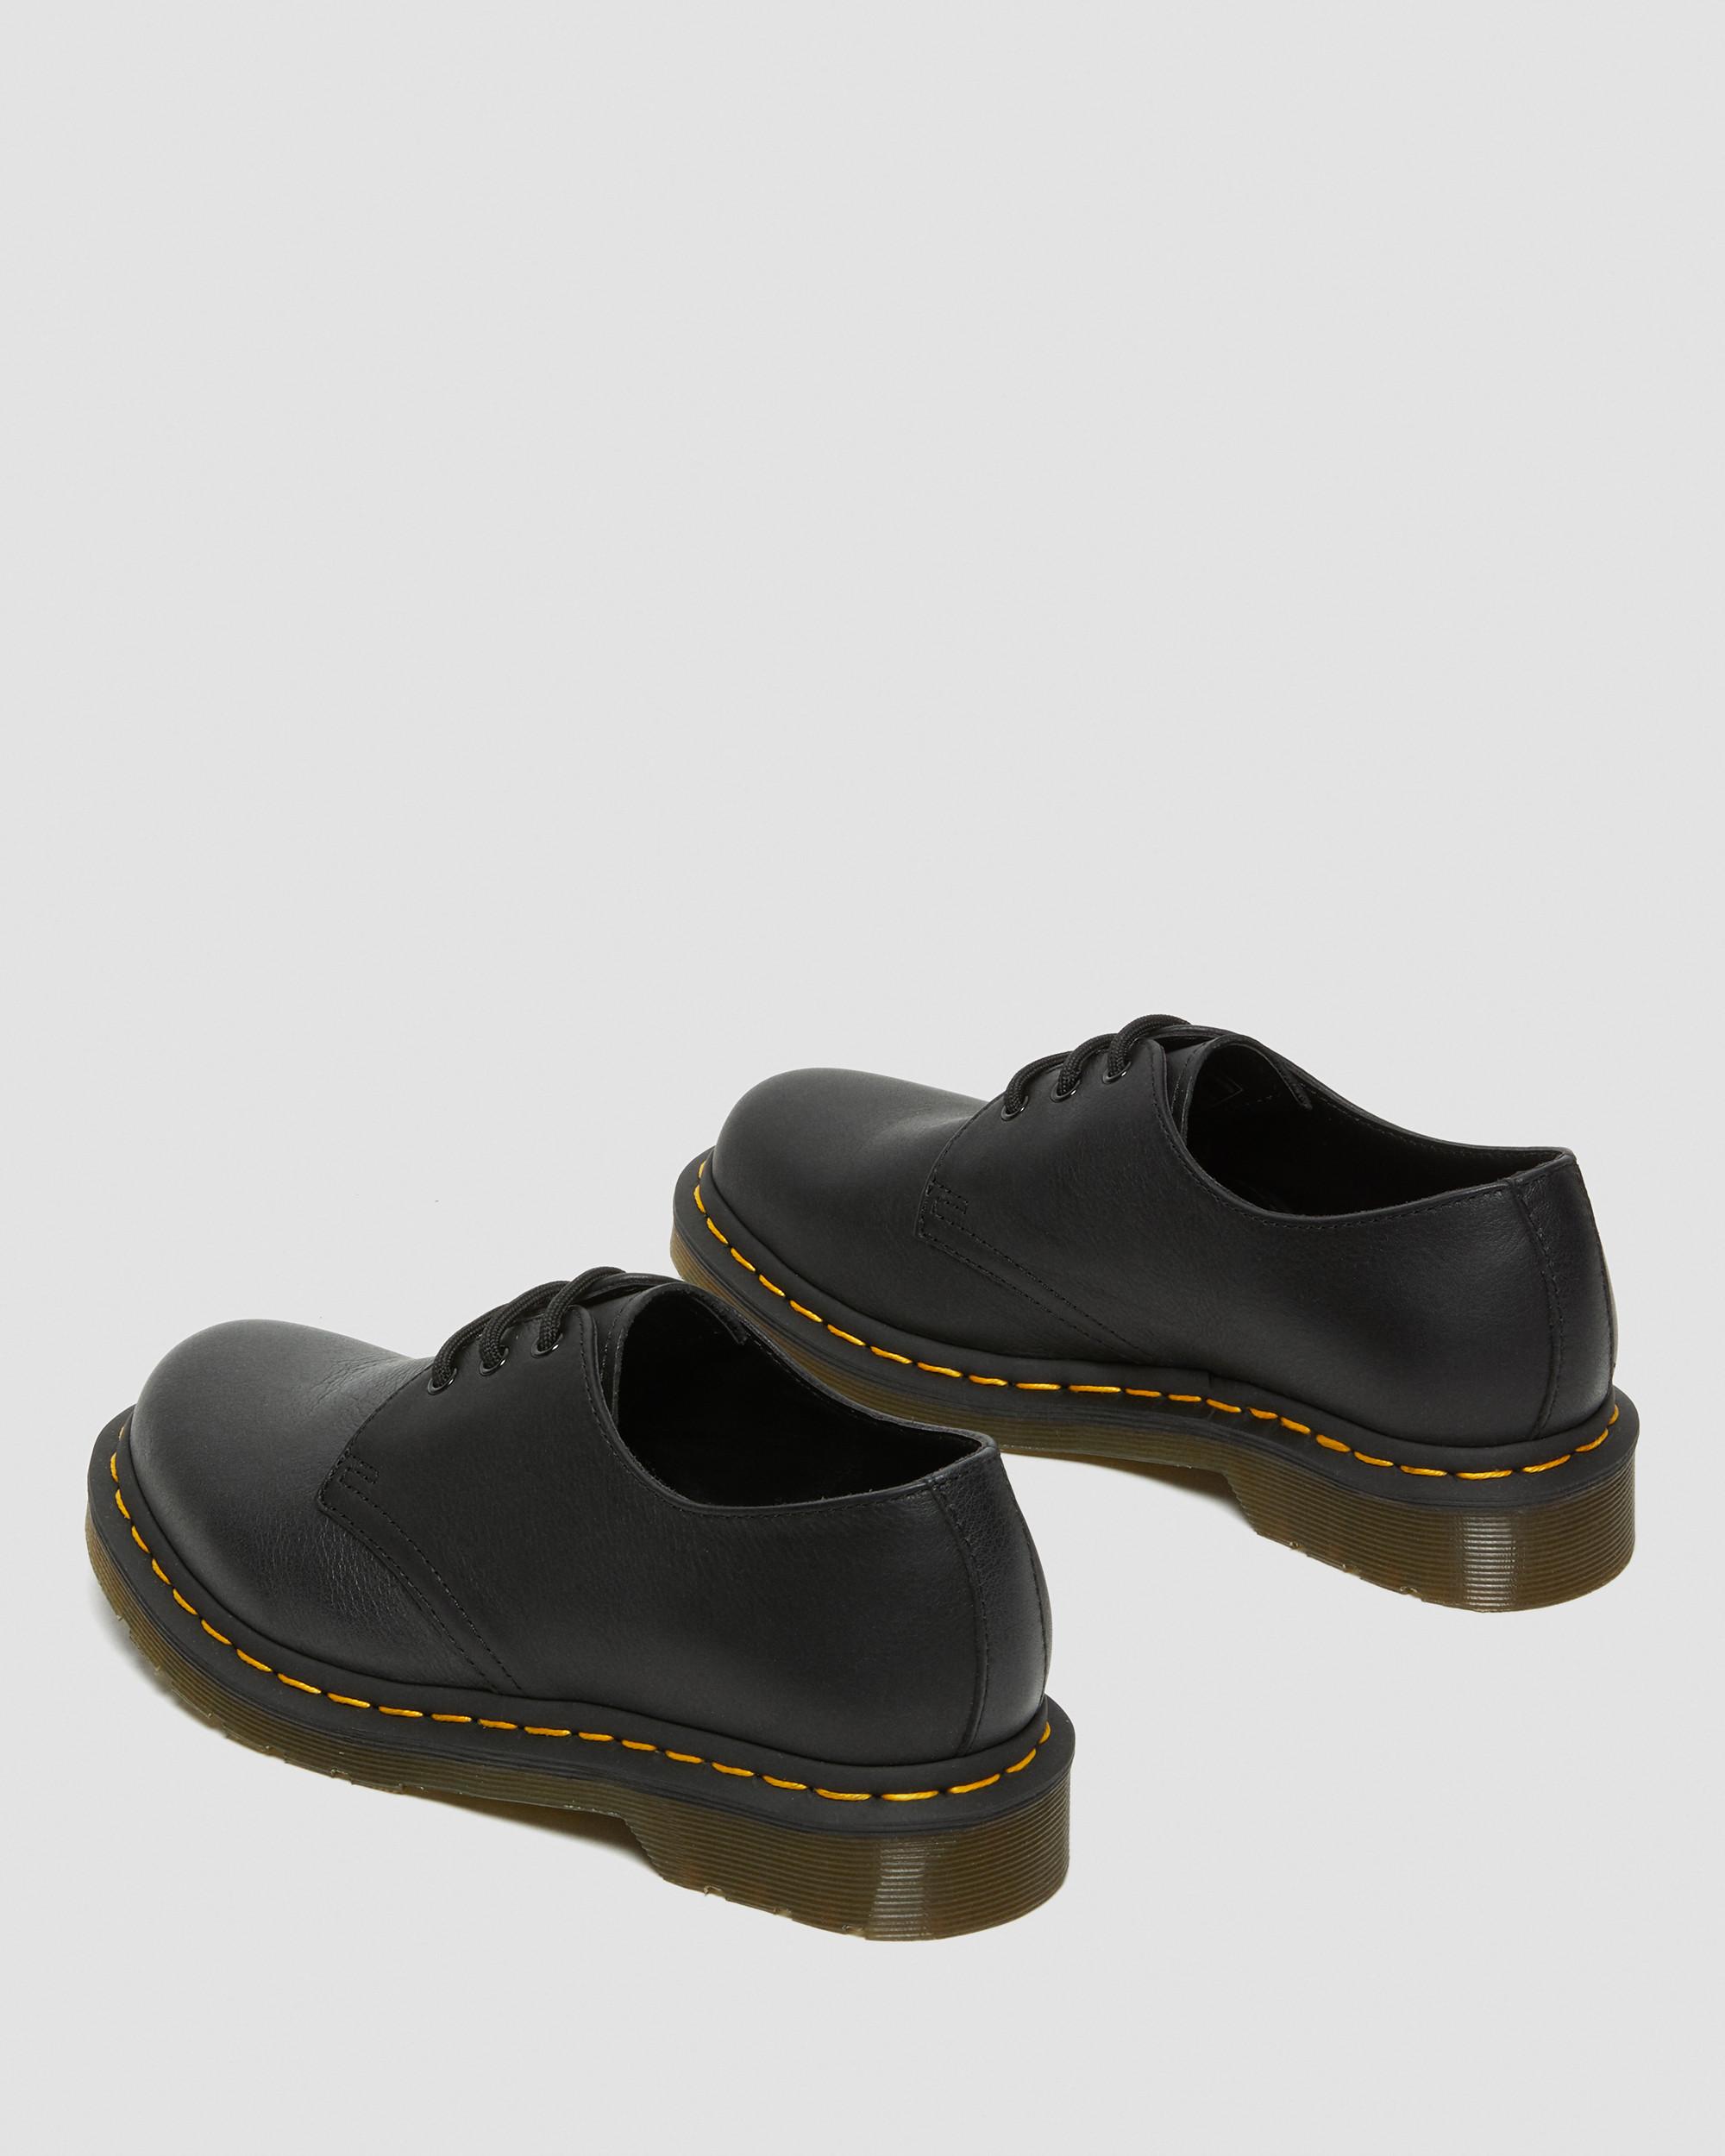 1461 Virginia Leather Oxford Shoes in Black